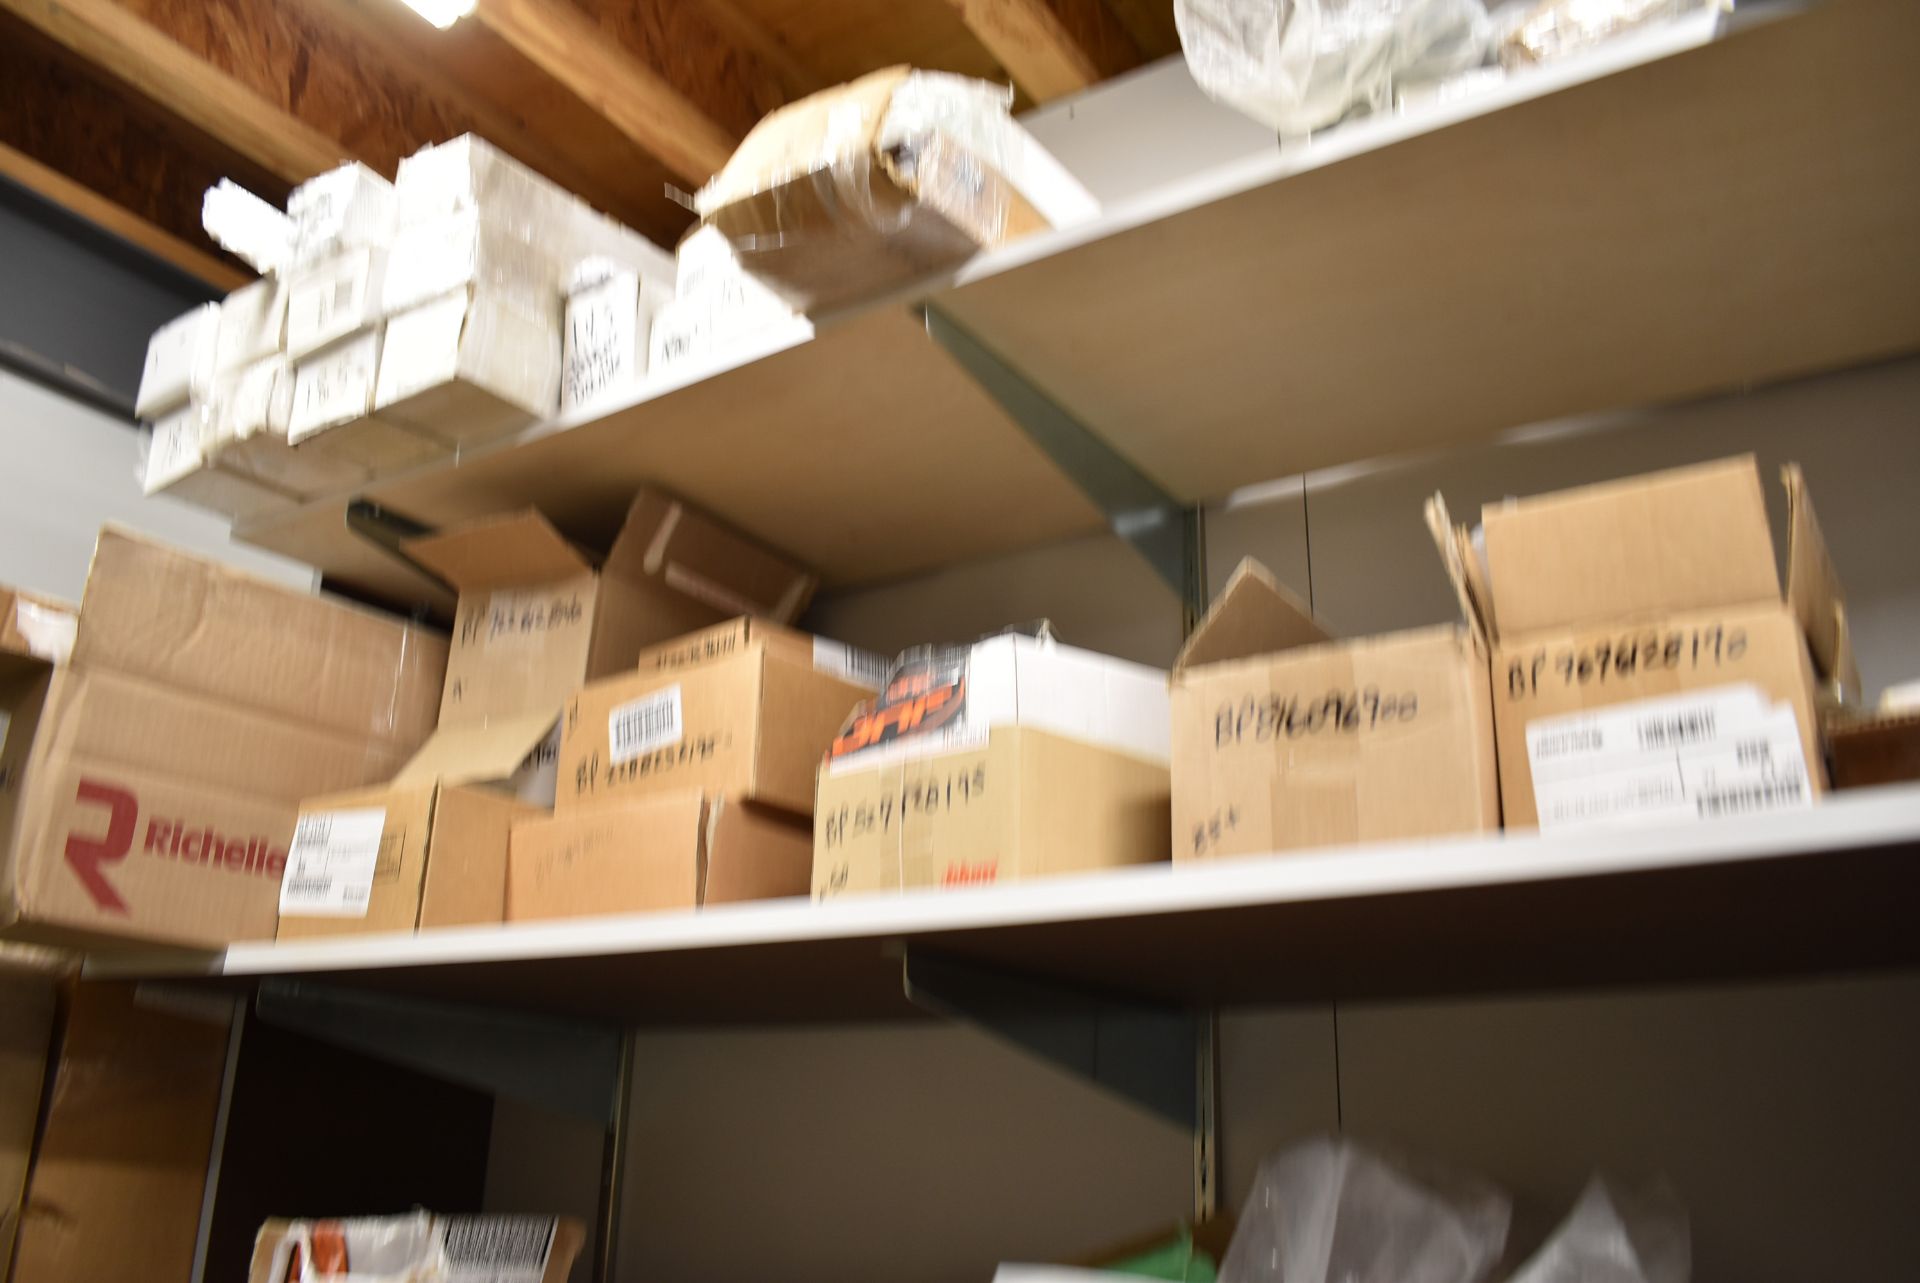 LOT/ CONTENTS OF STORAGE ROOM CONSISTING OF BLUM CABINET HARDWARE, SEALS AND SUPPLIES [RIGGING FEE - Image 16 of 18